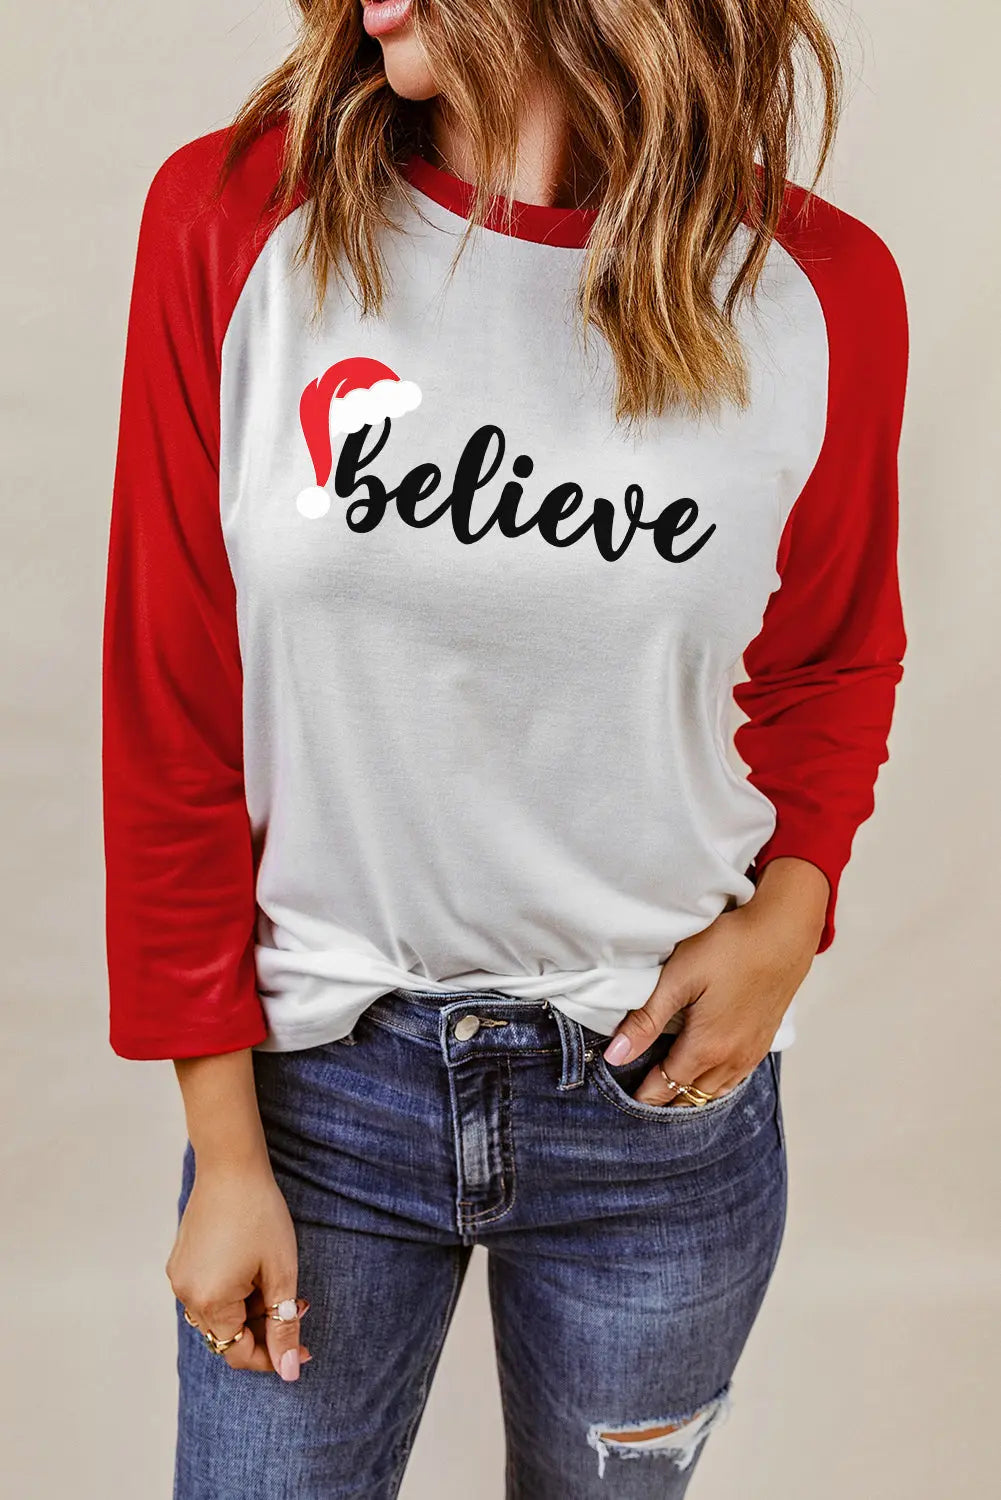 and White Color Block Long Sleeve Christmas T Shirt